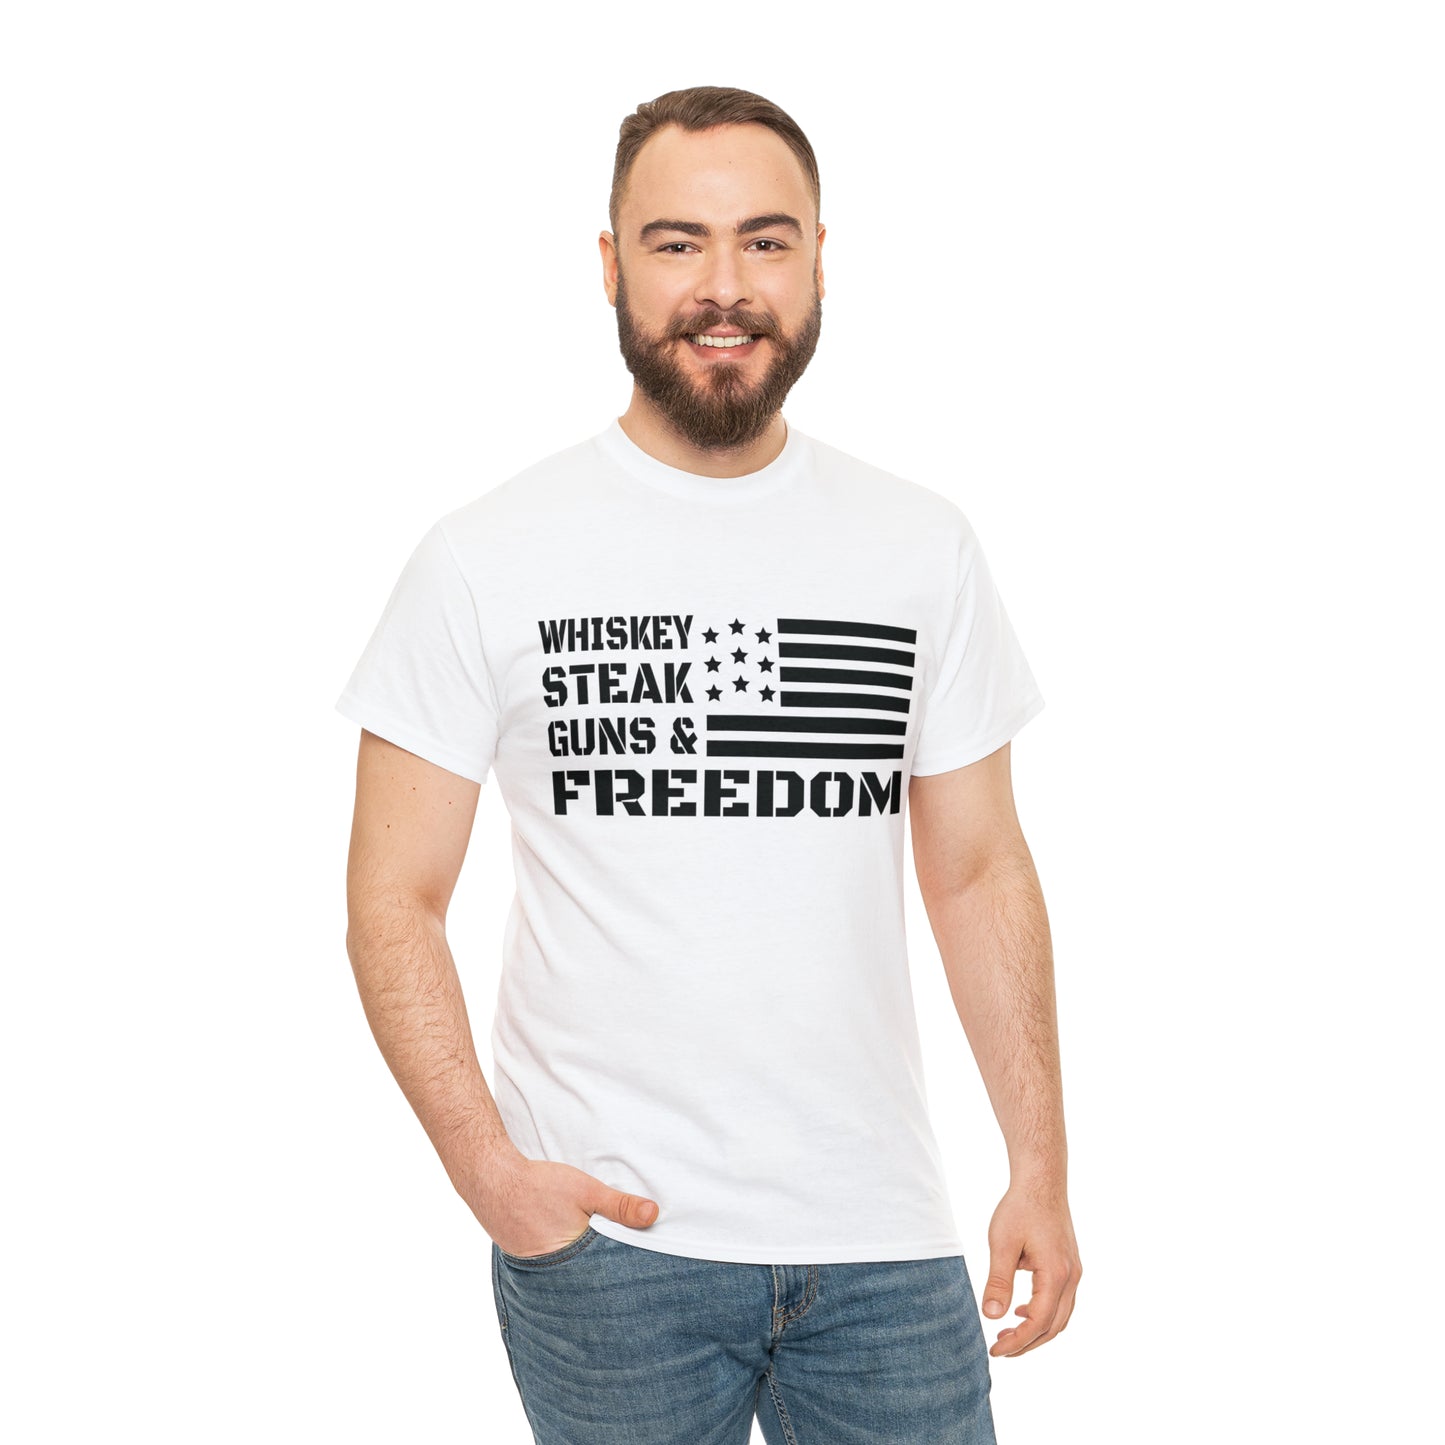 "Whiskey, Steak, Guns & Freedom" T-Shirt - Weave Got Gifts - Unique Gifts You Won’t Find Anywhere Else!